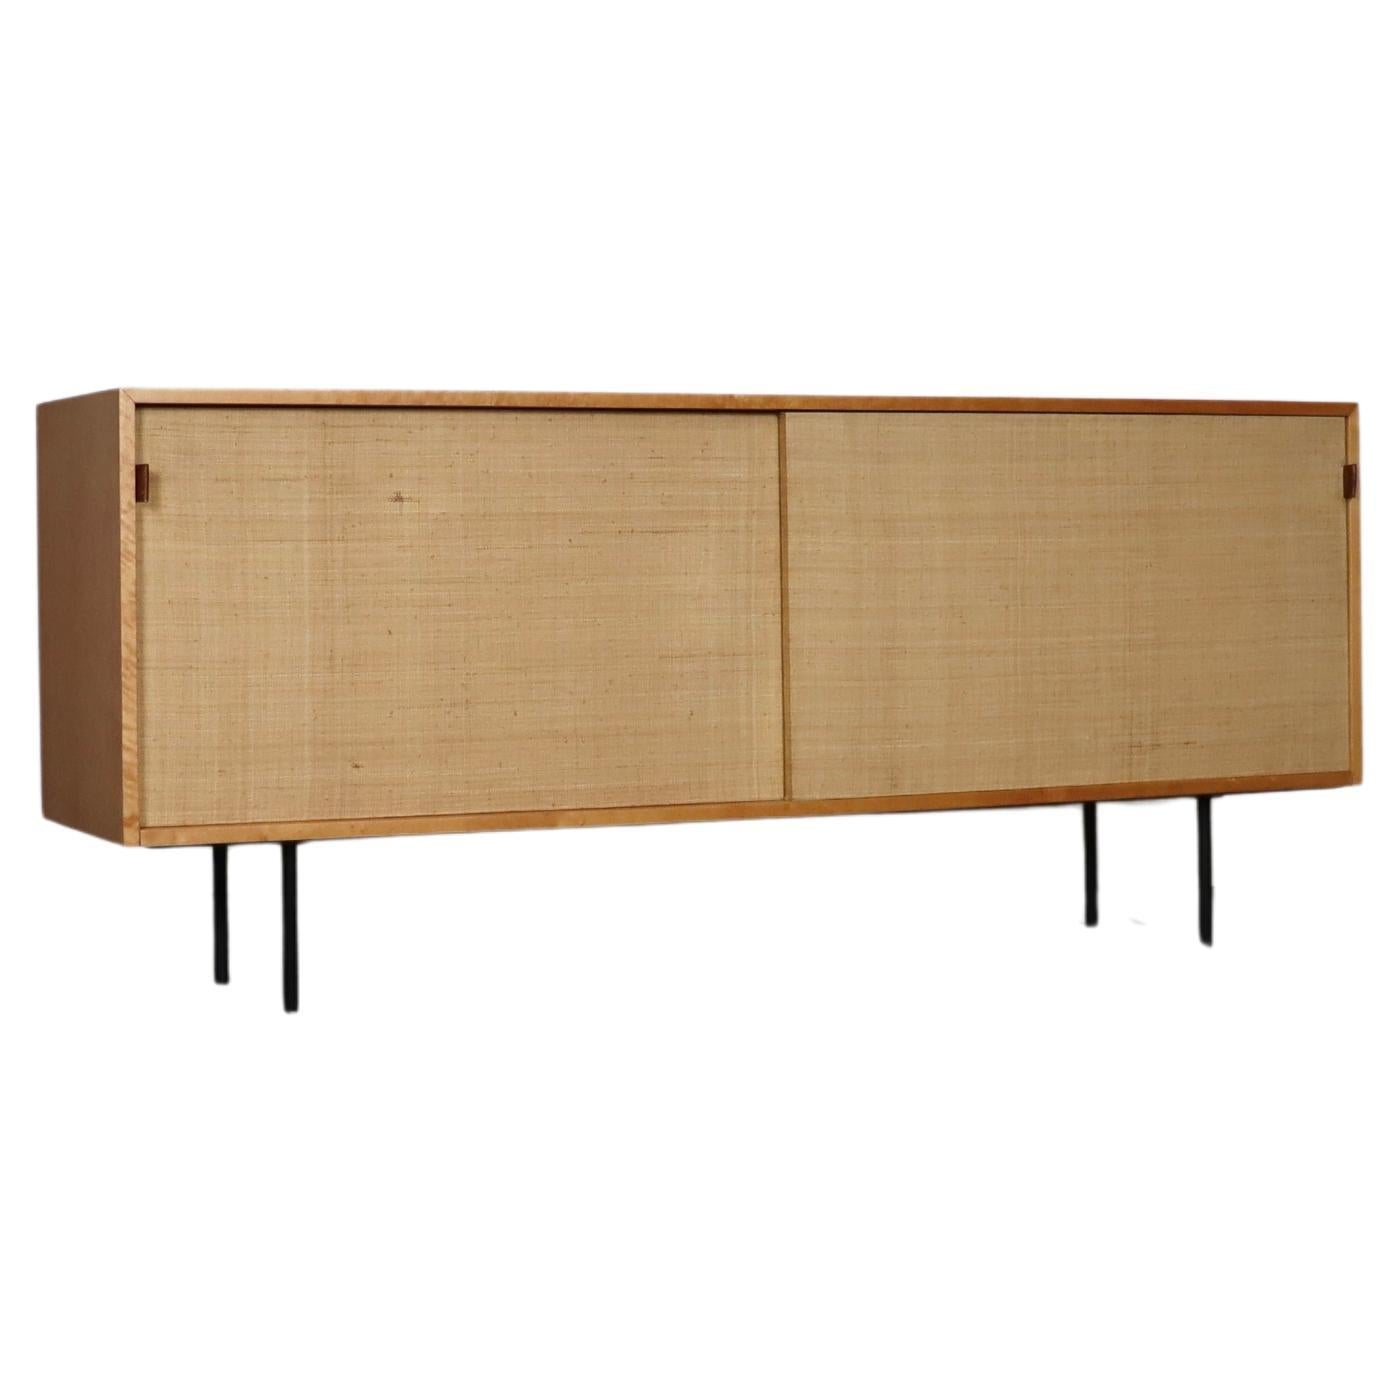 Florence Knoll Model 116 Seagrass Sideboard, 1950s